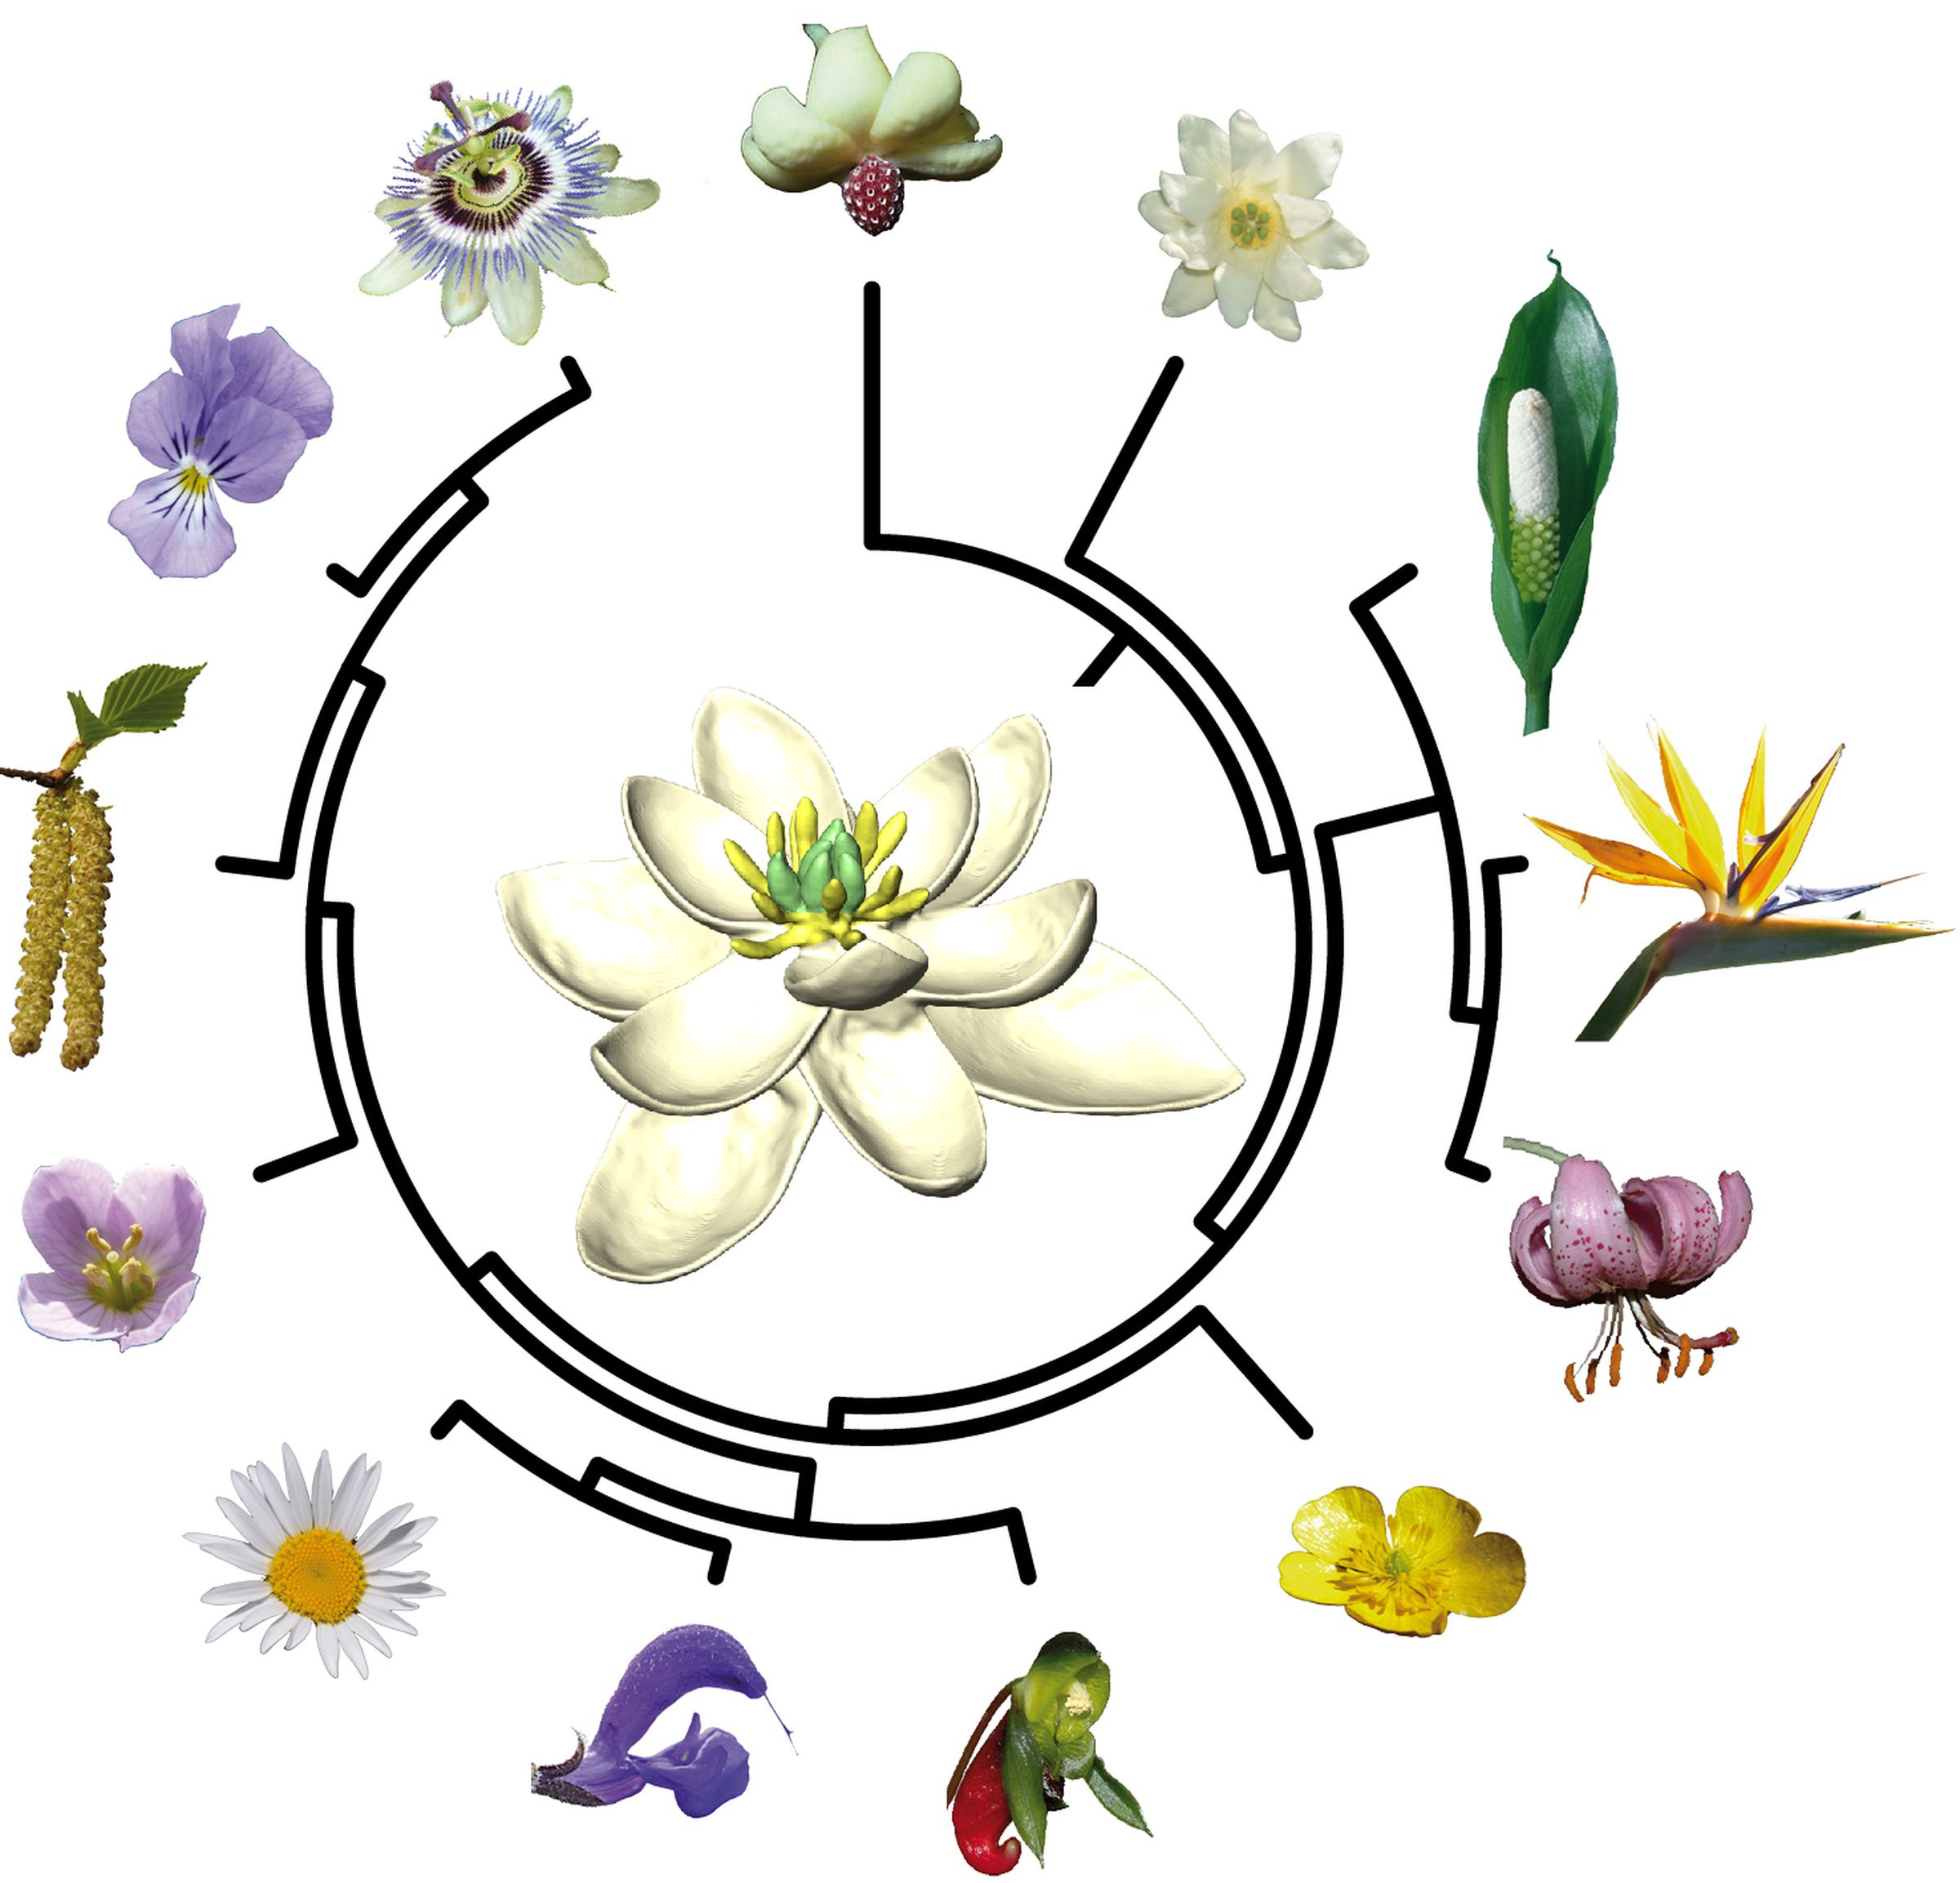 A simplified evolutionary tree connecting all living species of flowering plants to the ancestral flower (center) that lived 140 million years ago.